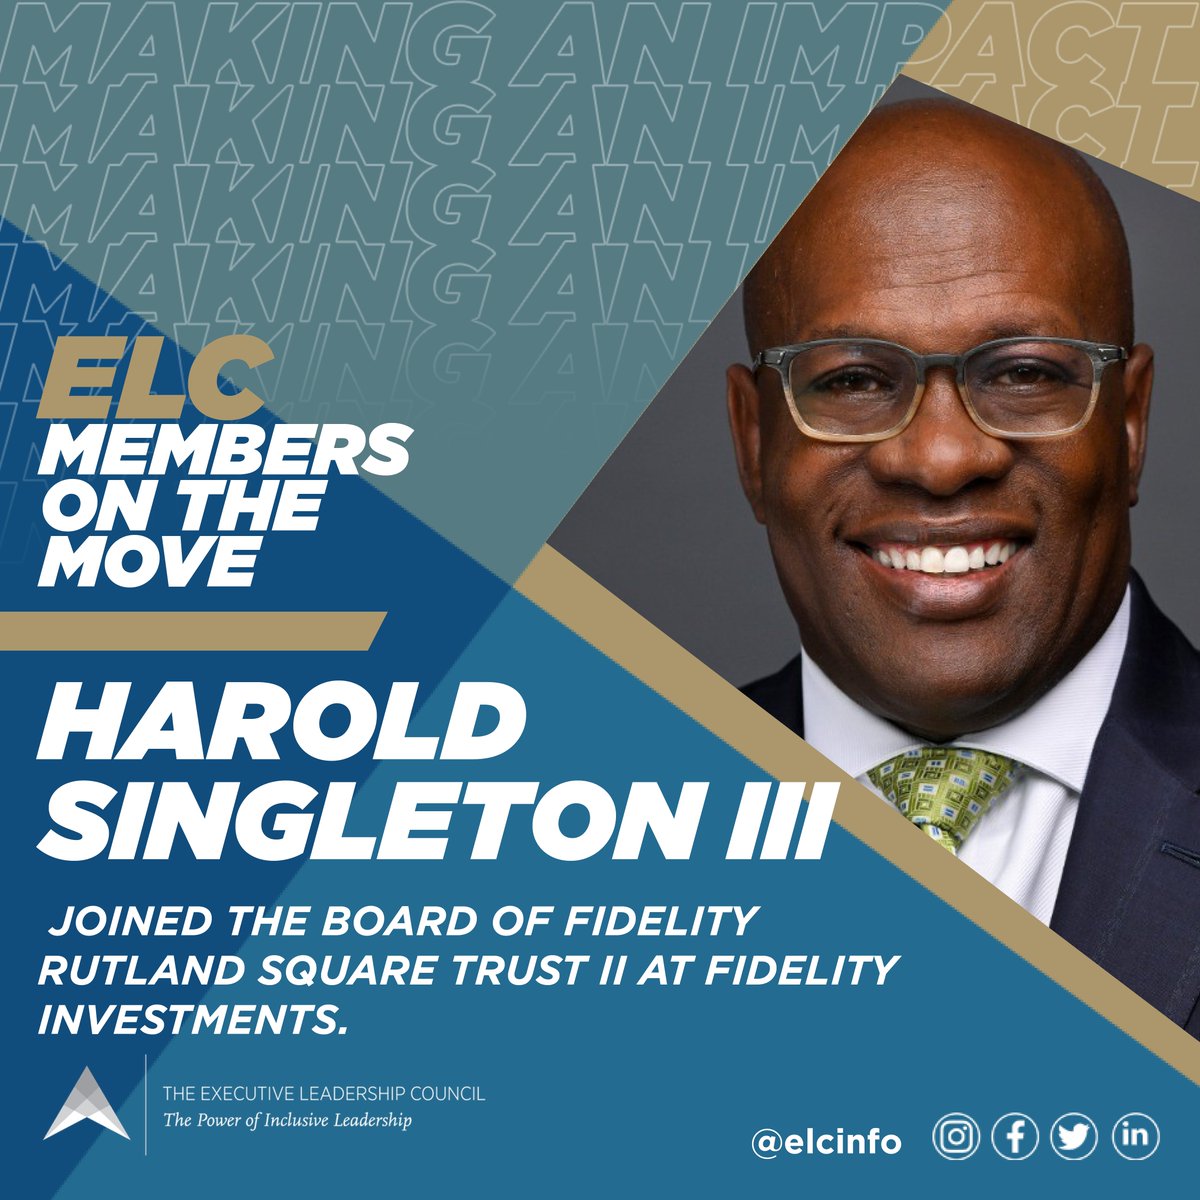 Congratulations to #ELCMember Harold Singleton III, who joined the Board of Fidelity Rutland Square Trust II at @Fidelity Investments.

#ELCMembersOnTheMove #BlackMenLead #BlackExecutives #BlackLeadership